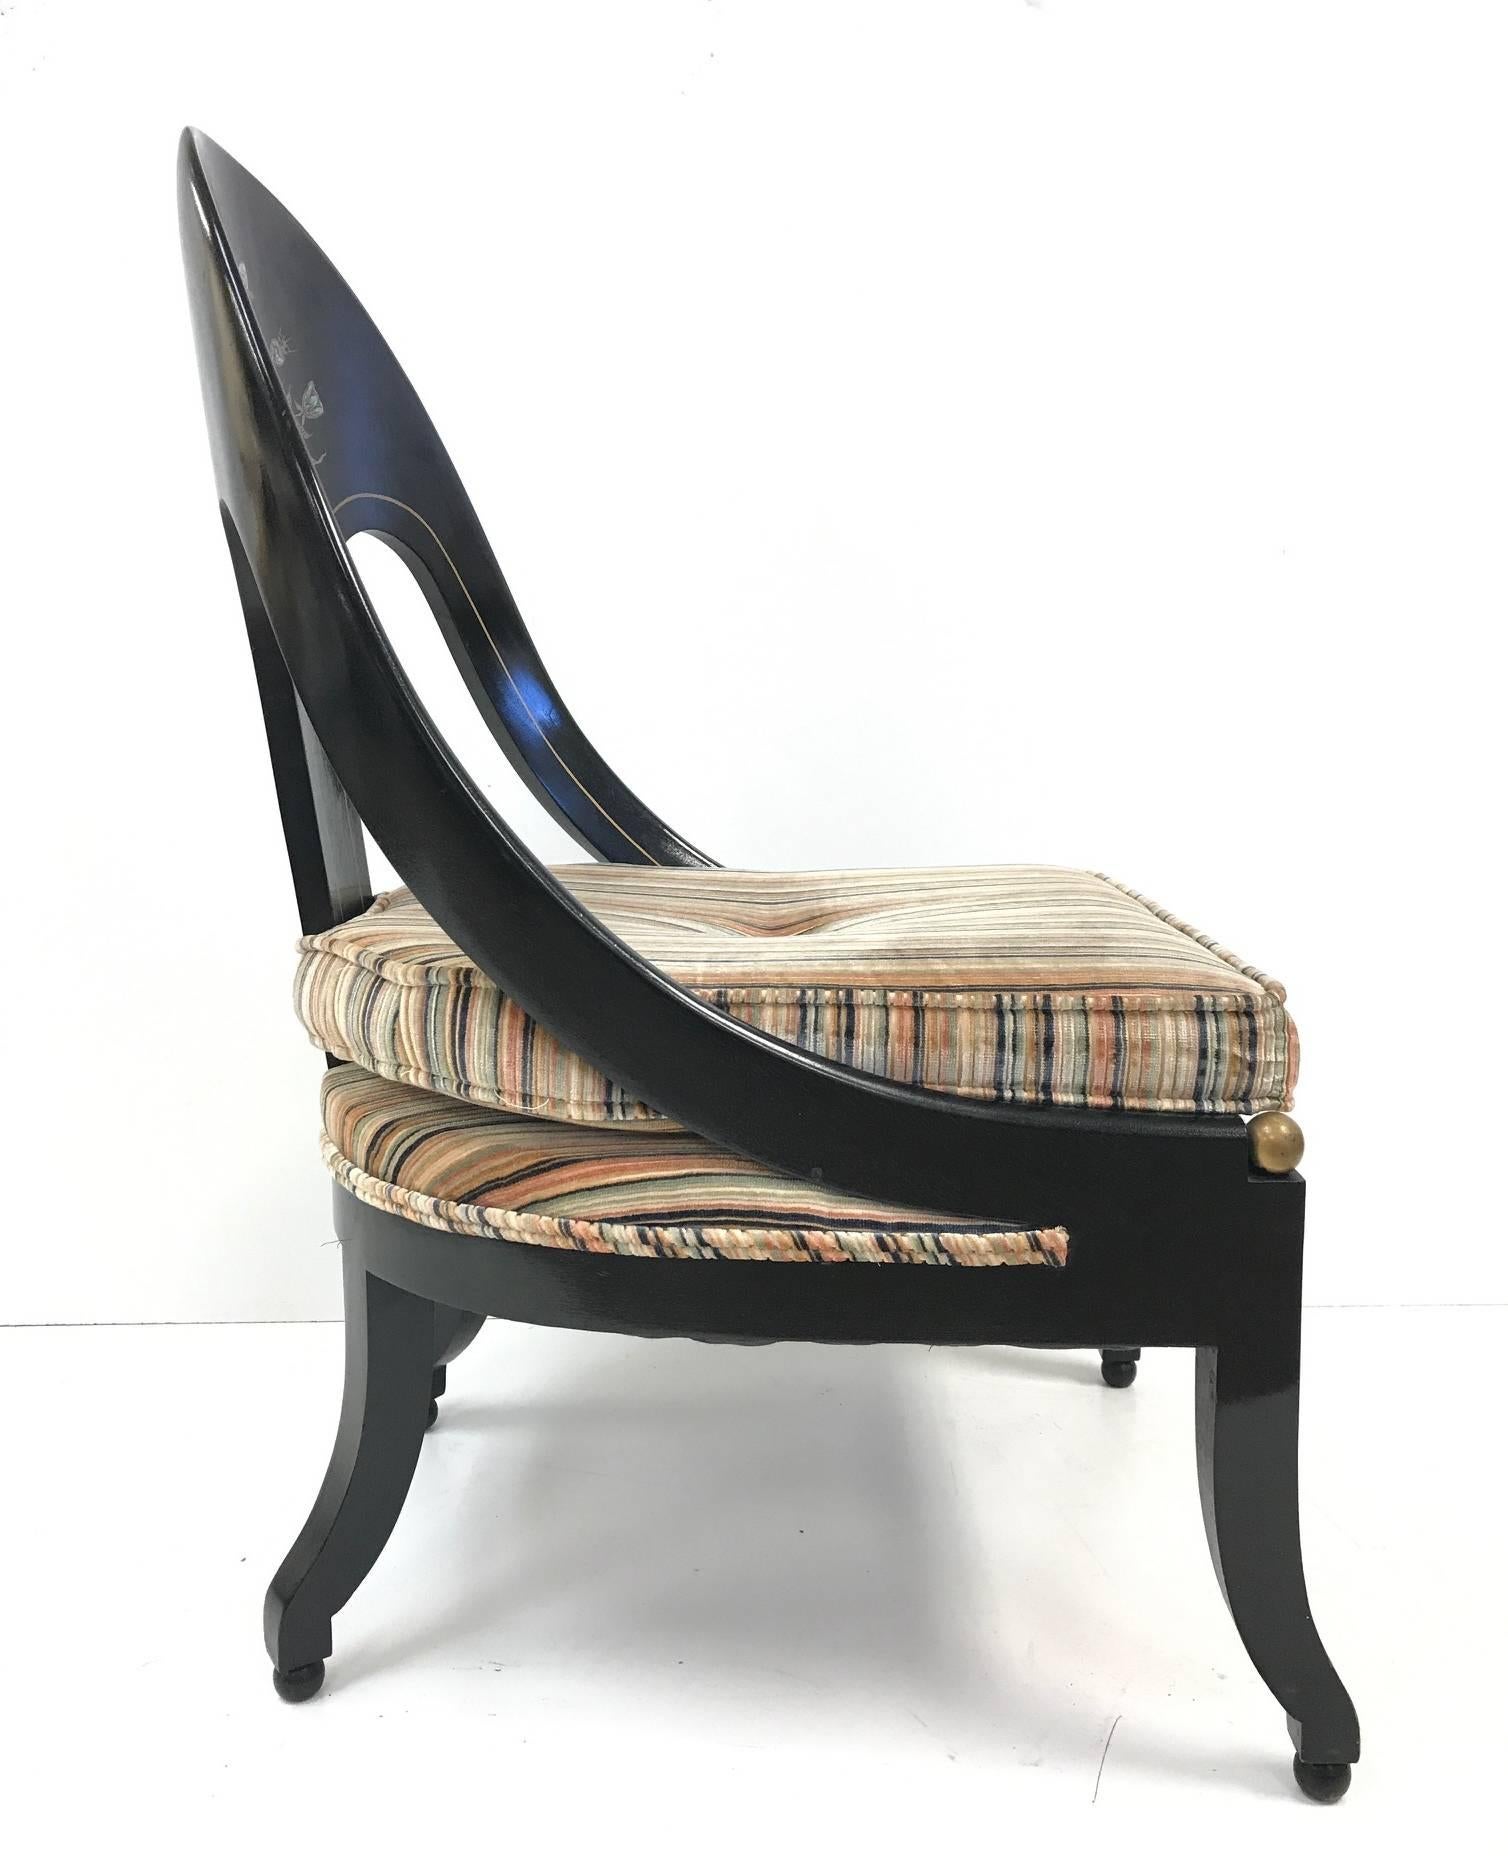 Chairs have black lacquered frames, original upholstered seating, a floral mother-of-pearl inlay pattern with gold trim to the back of the chairs. James Mont Style. 